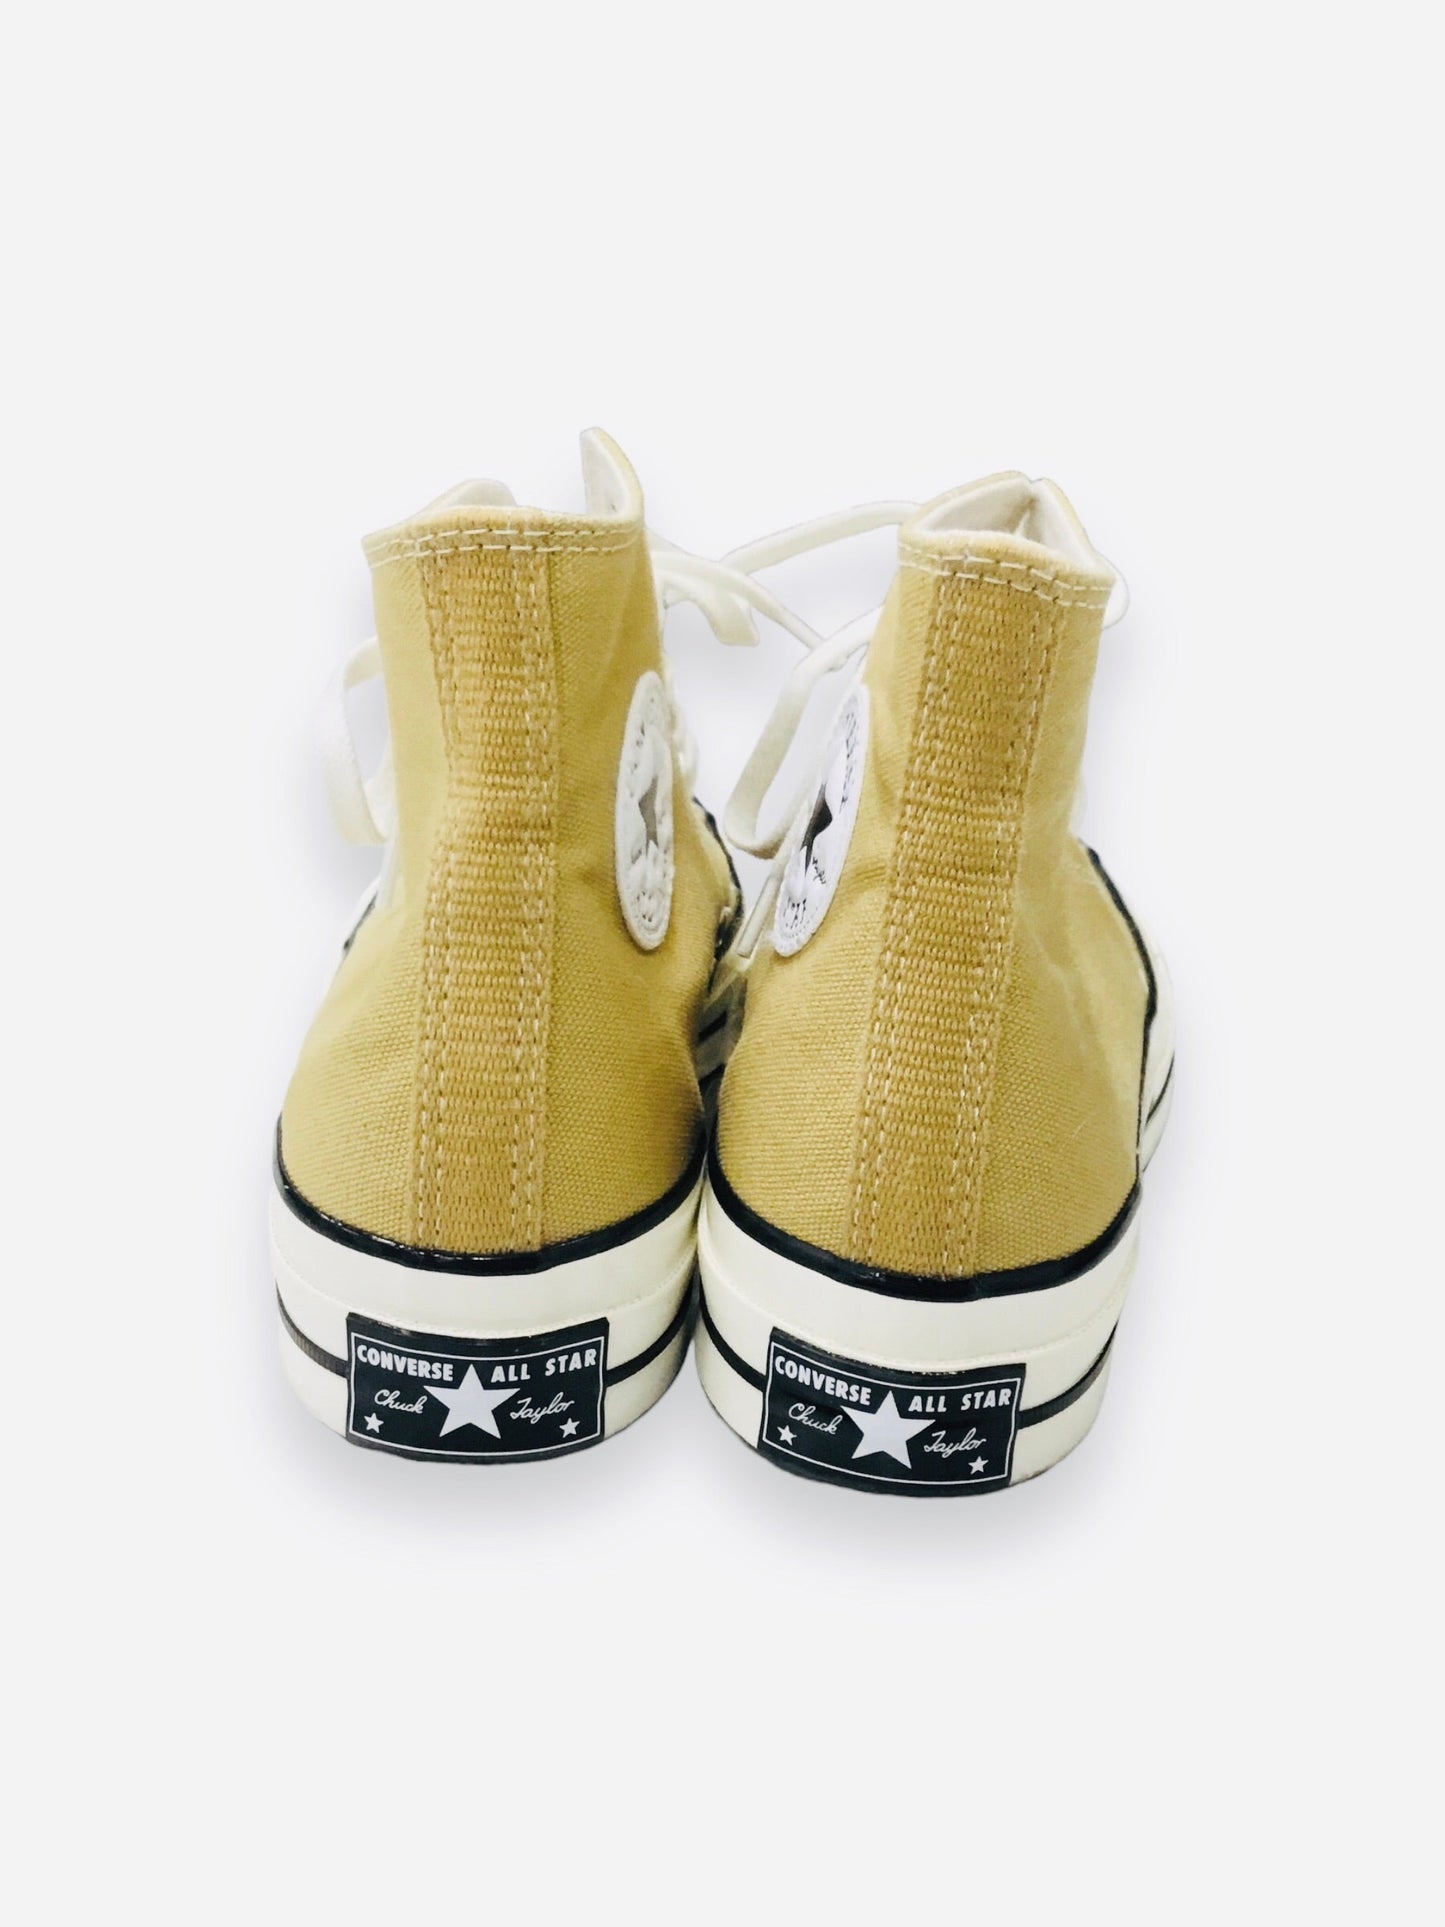 Yellow Shoes Athletic Converse, Size 8.5